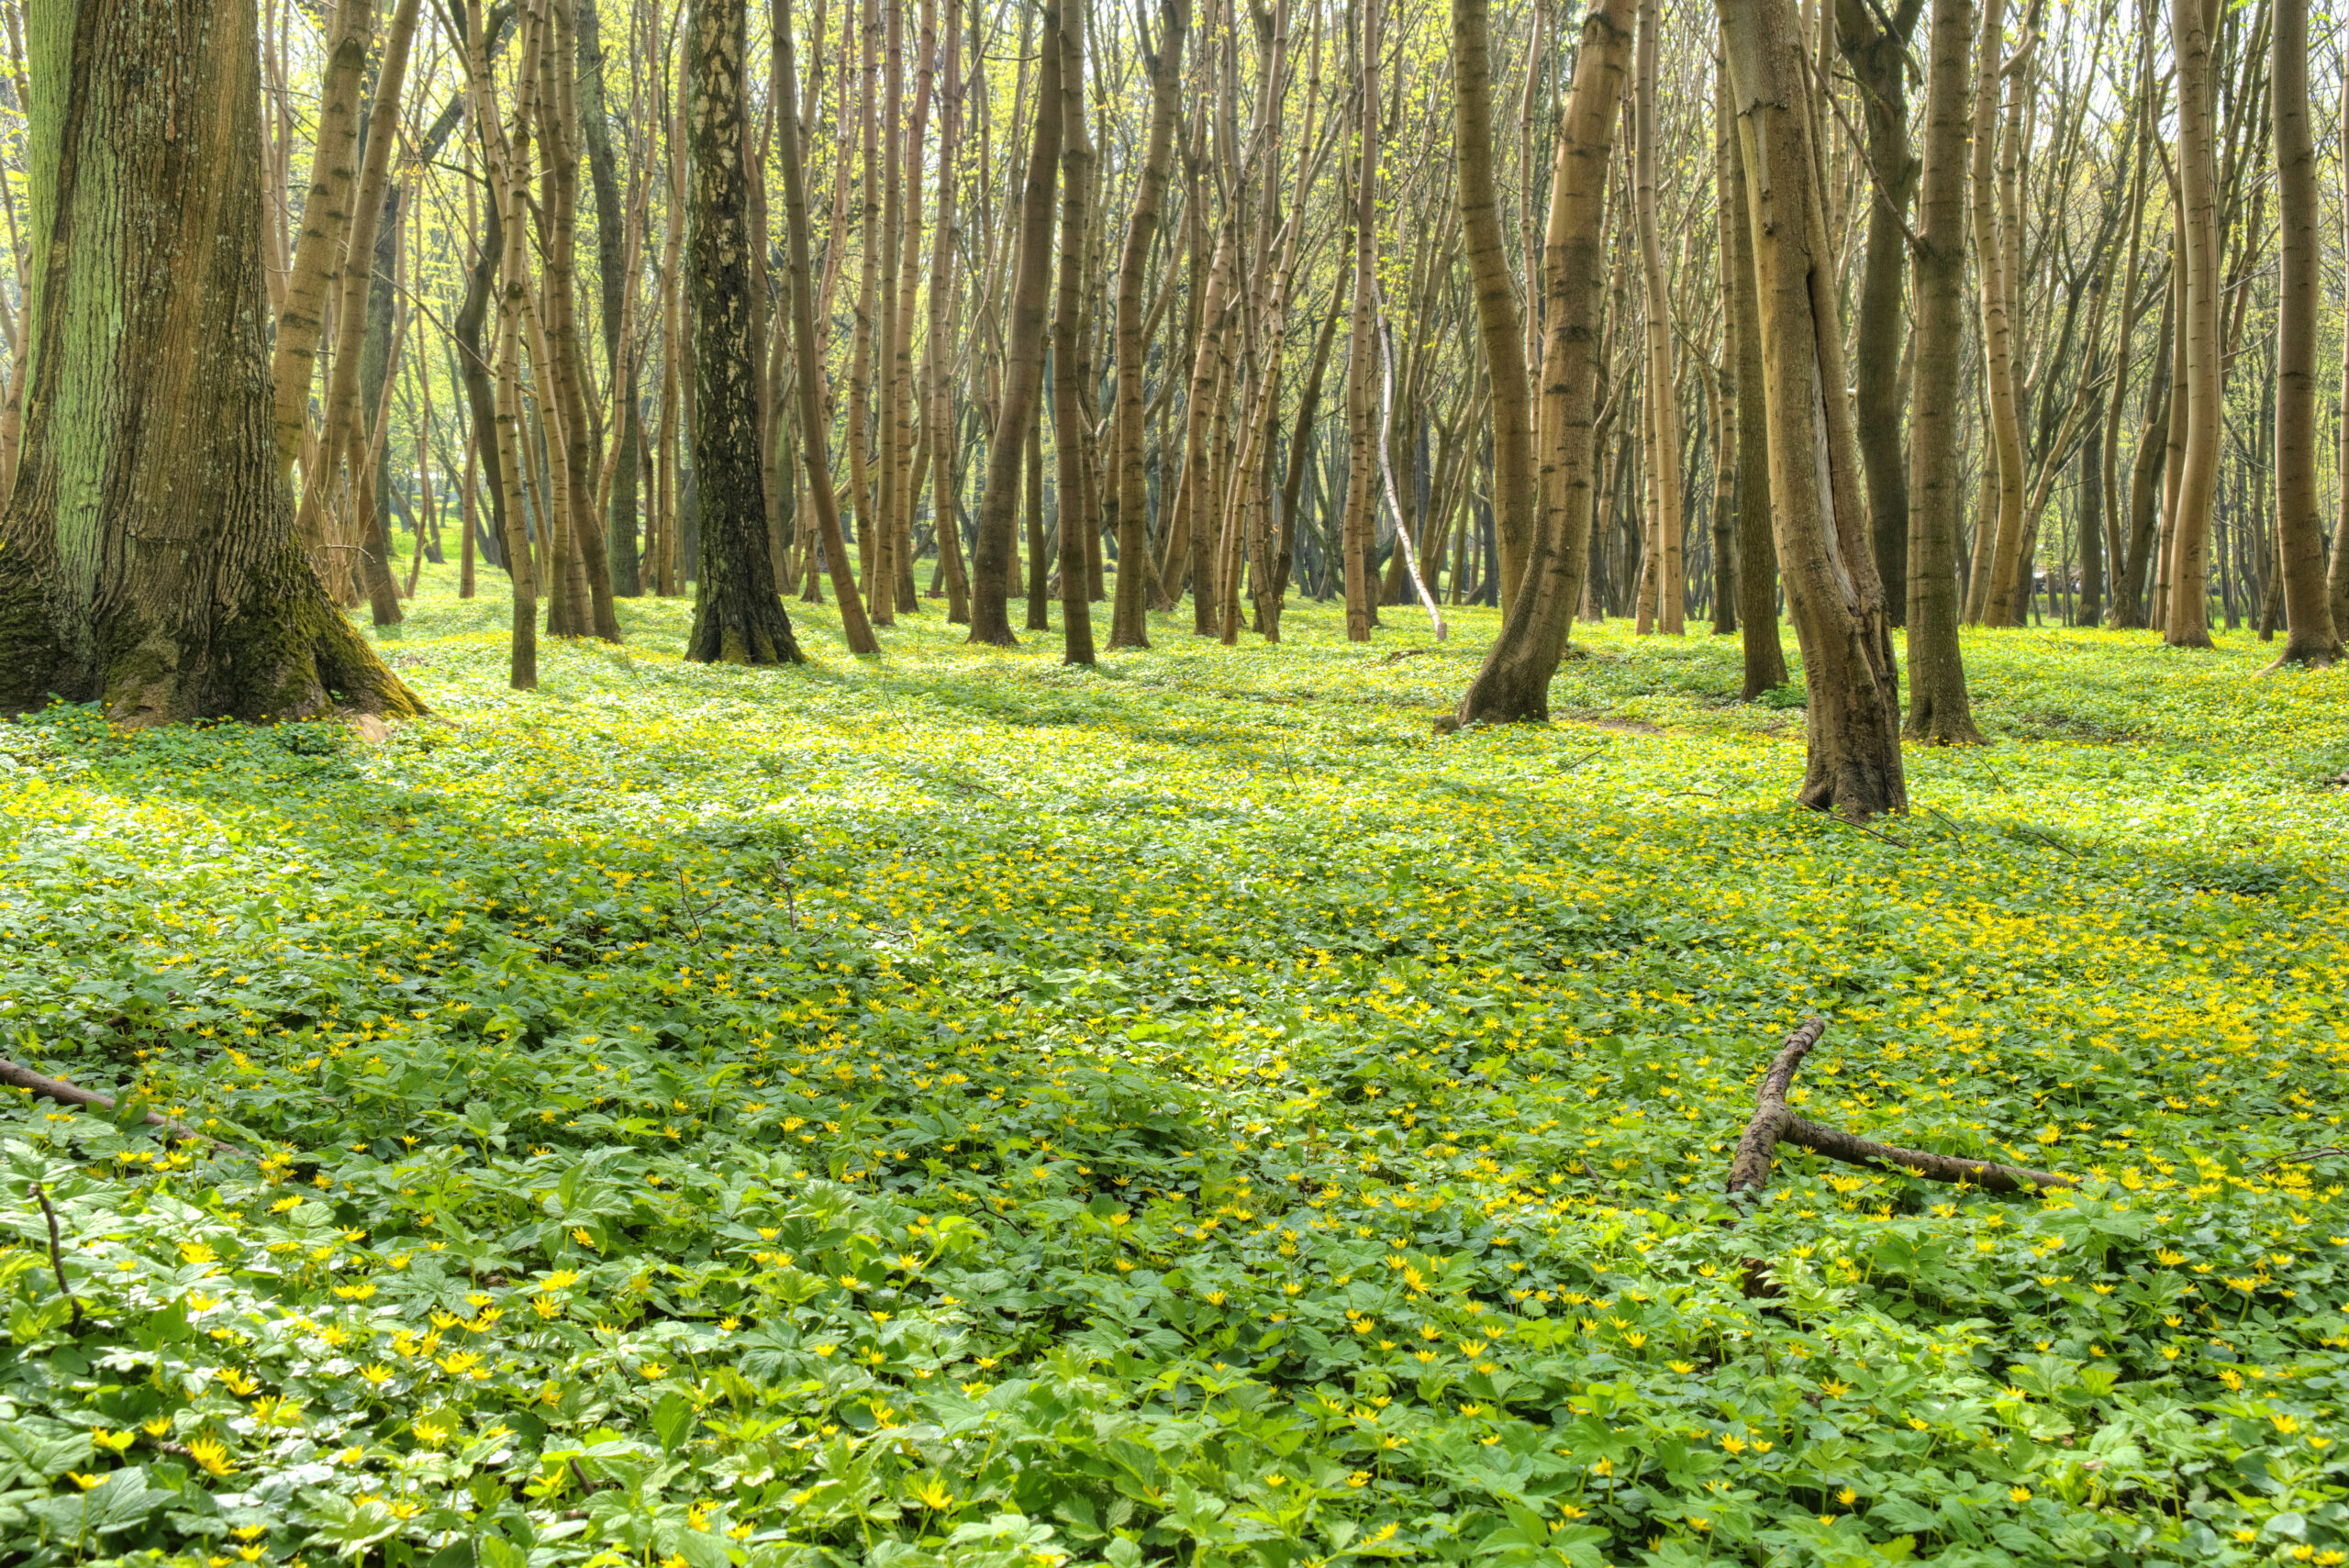 A thick layer of green foliage with small yellow flowers covers a section of forest floor.